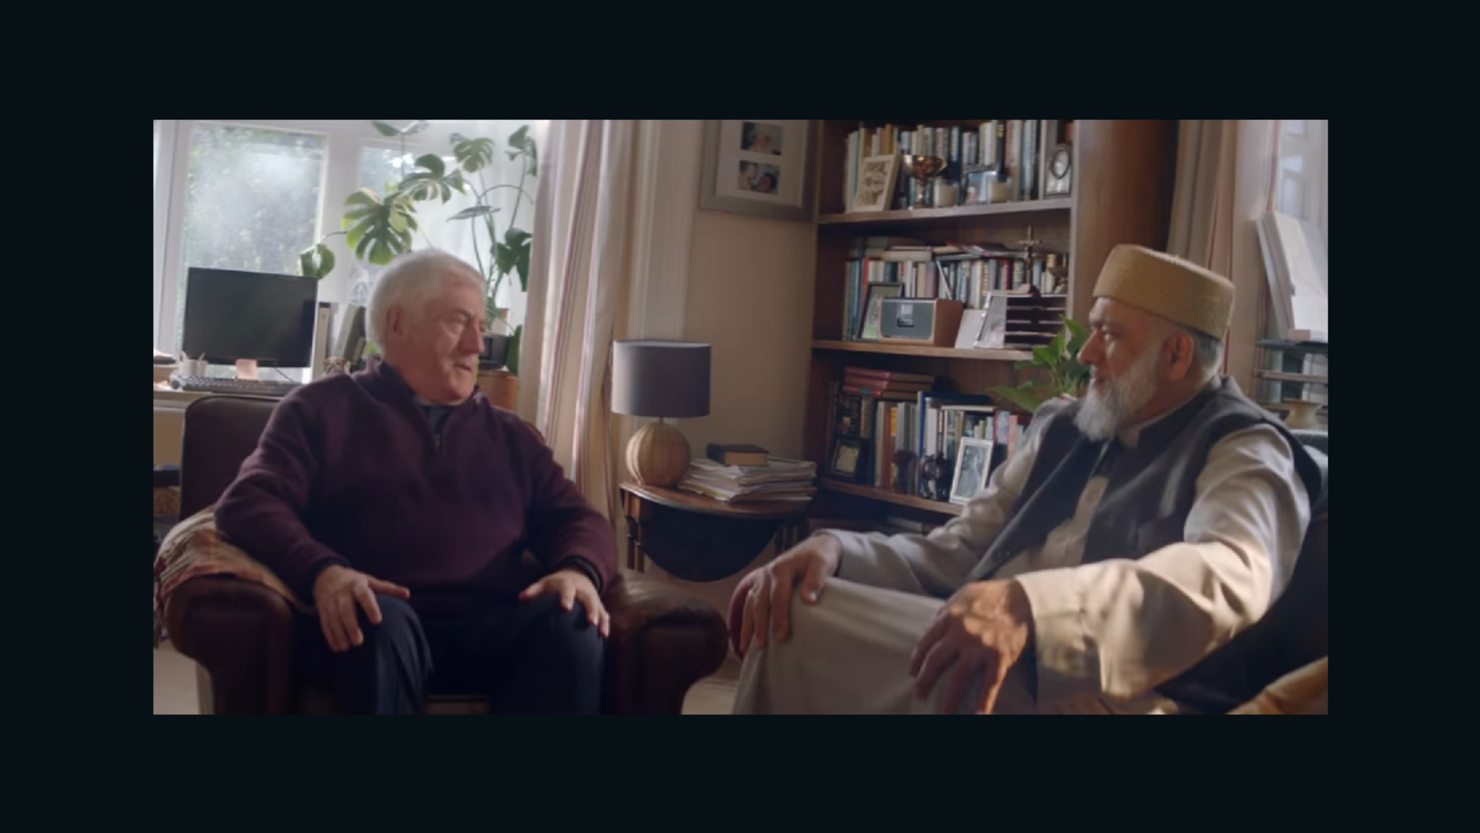 A priest and an imam bond -- and send each other matching gifts -- in this Amazon spot.